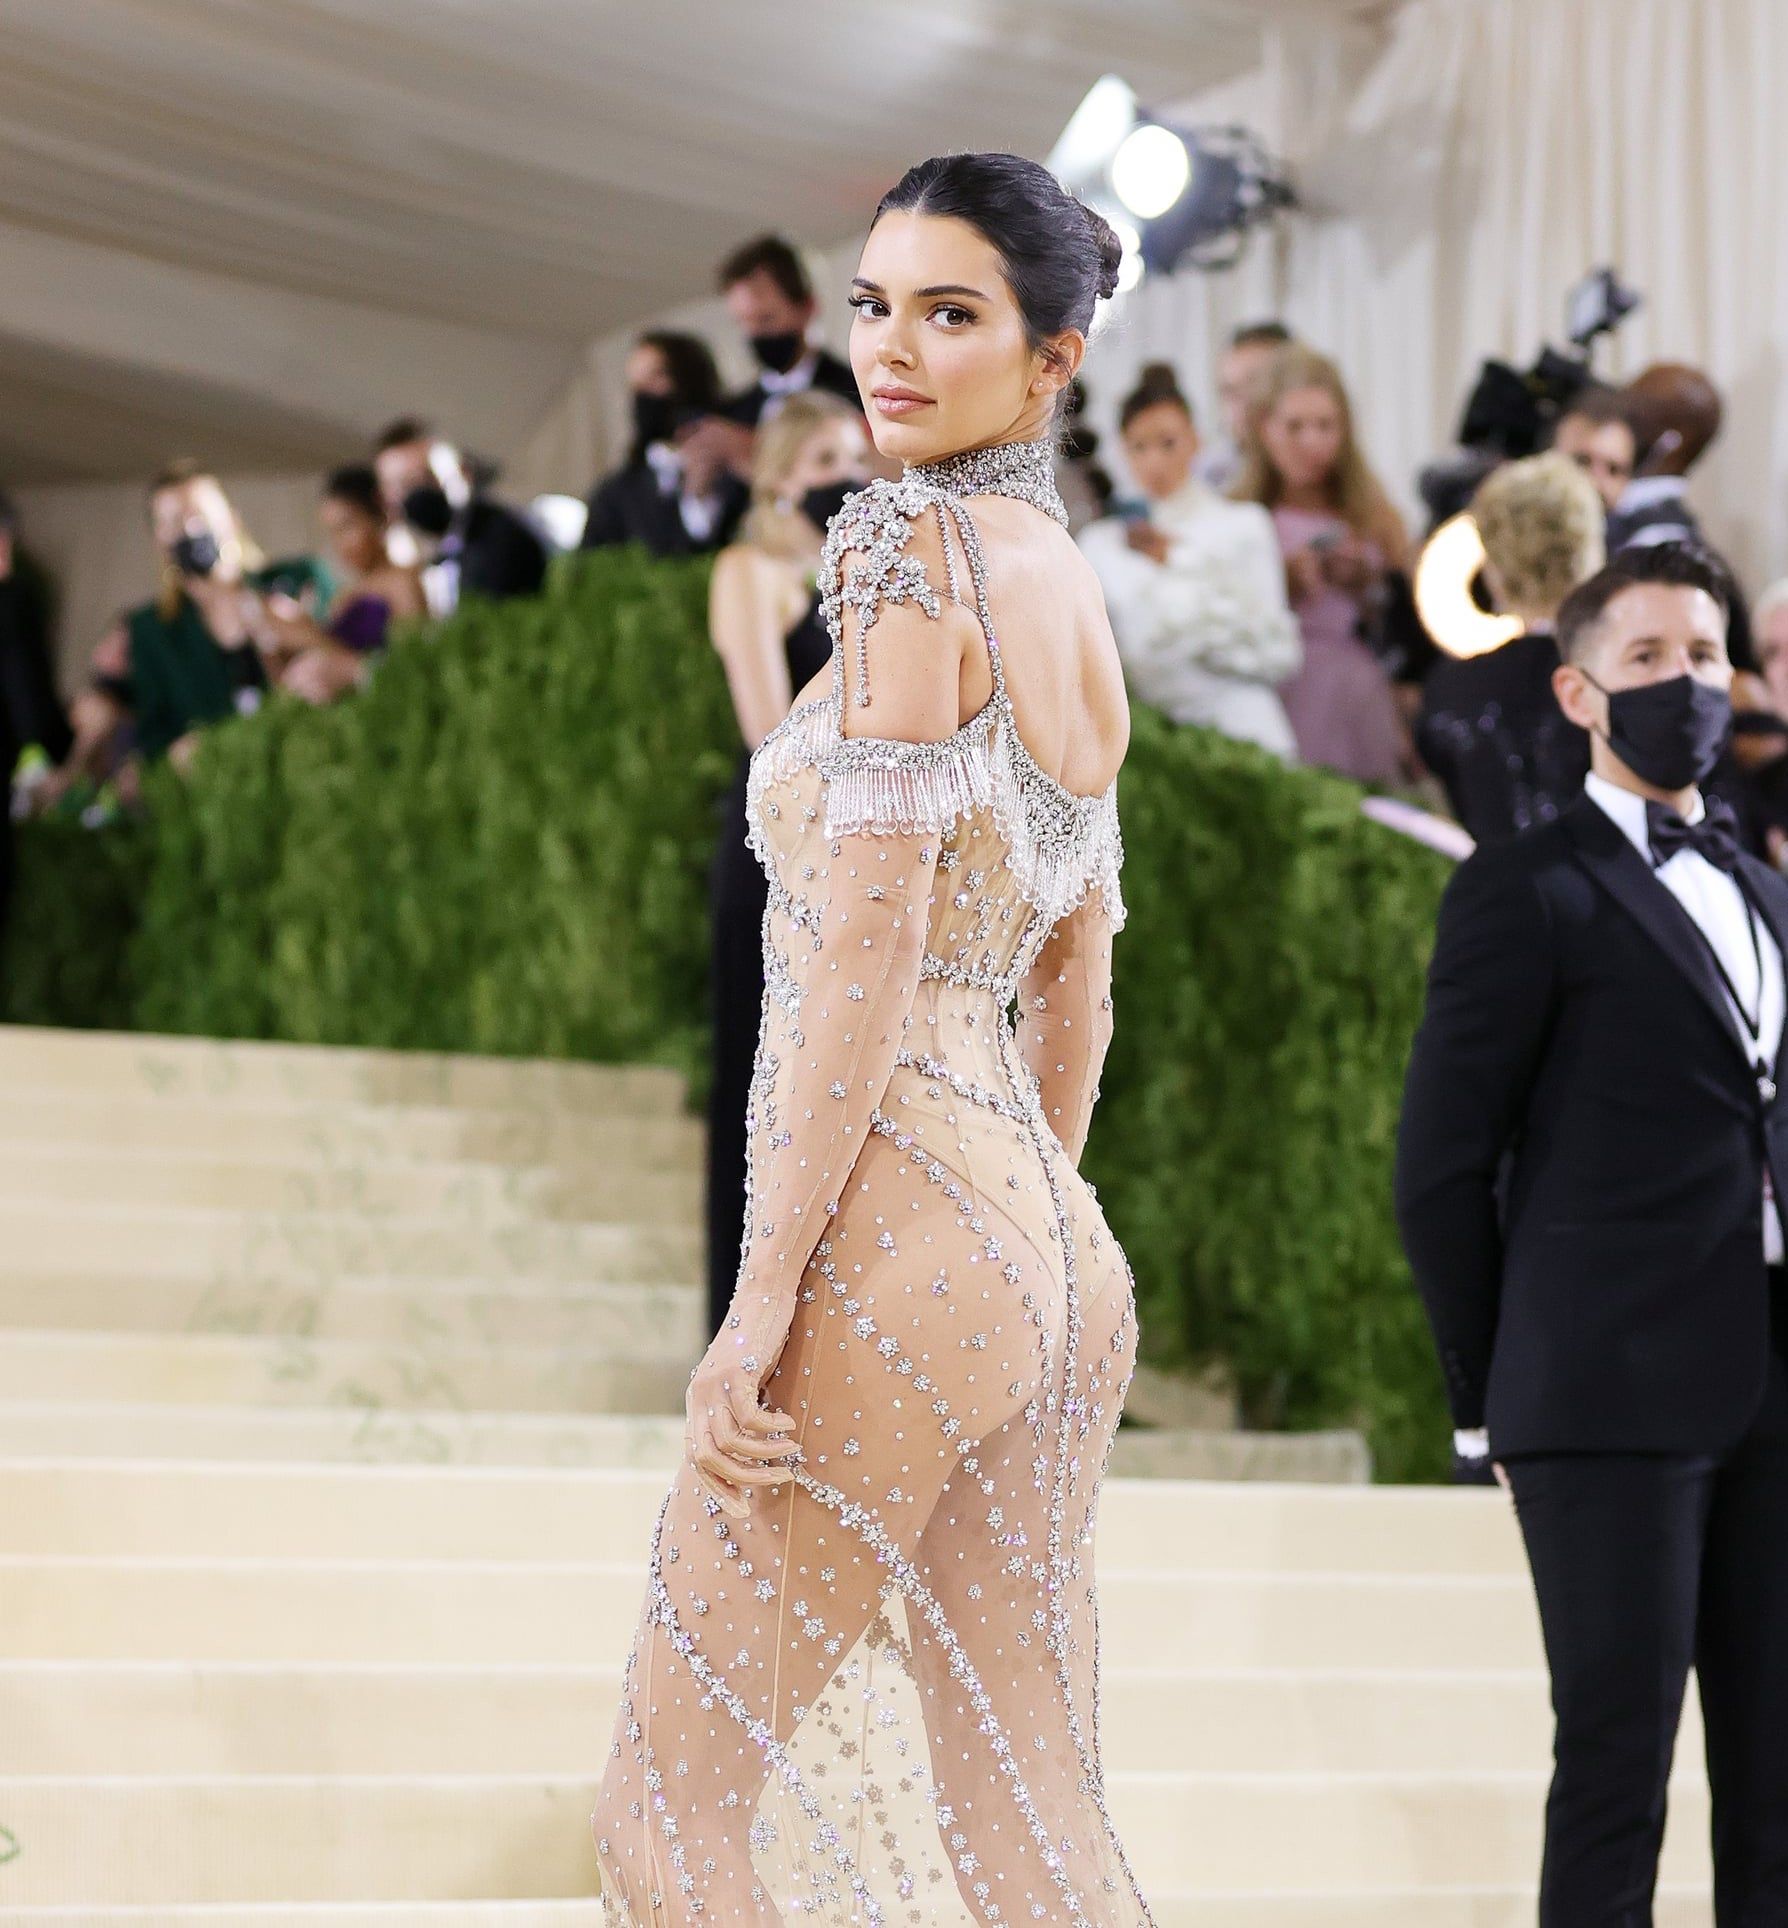 Kendall Jenner's Best Outfits of 2021: Met Gala Givenchy and More